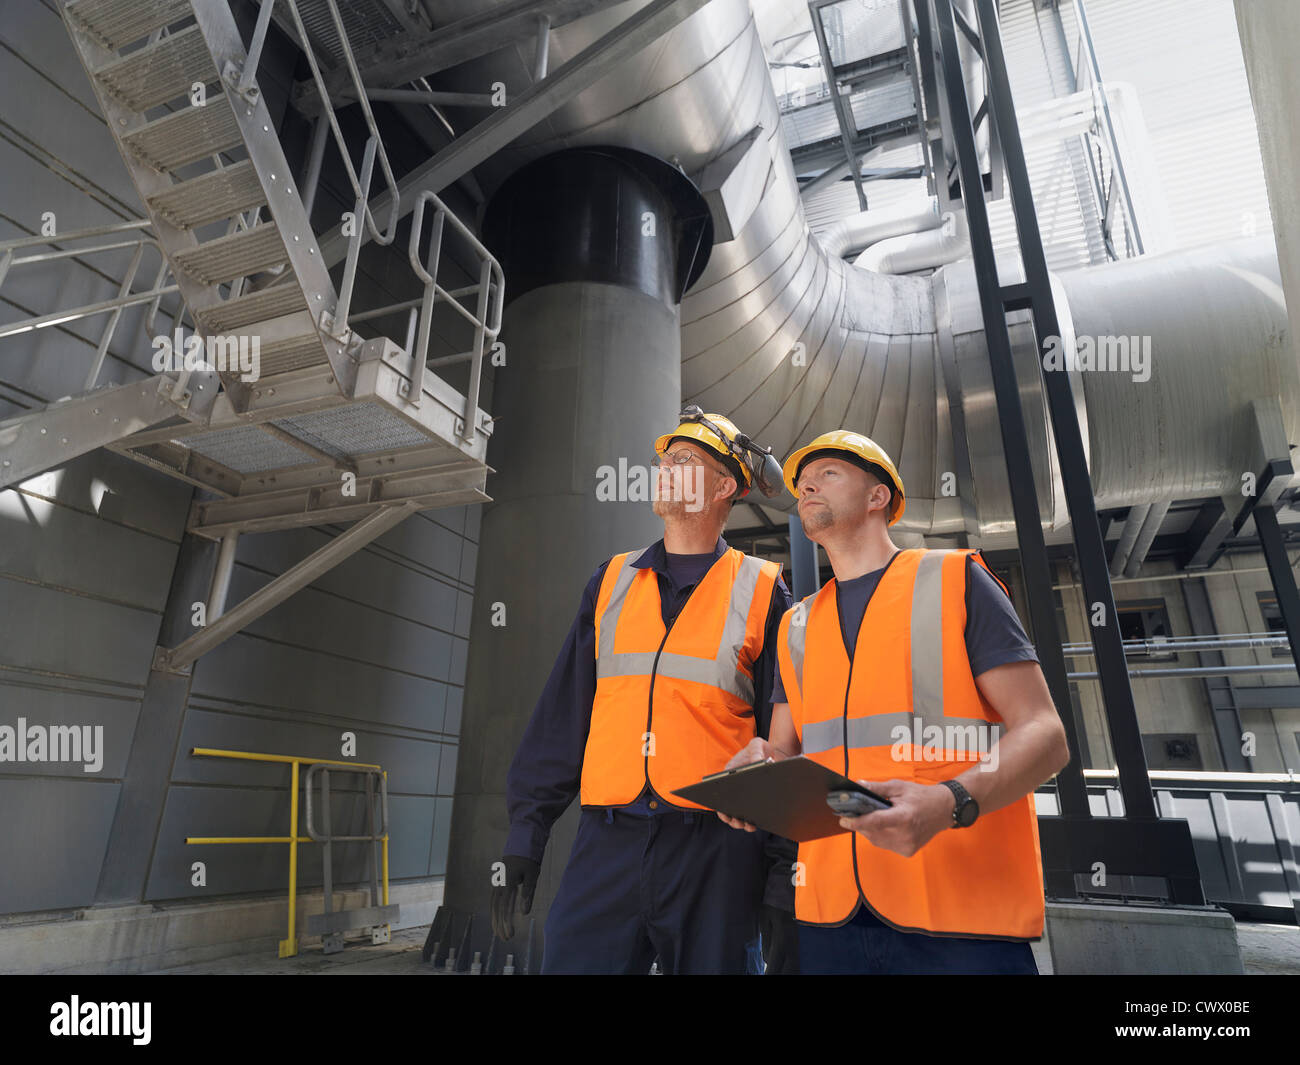 Workers examining machinery in factory Stock Photo